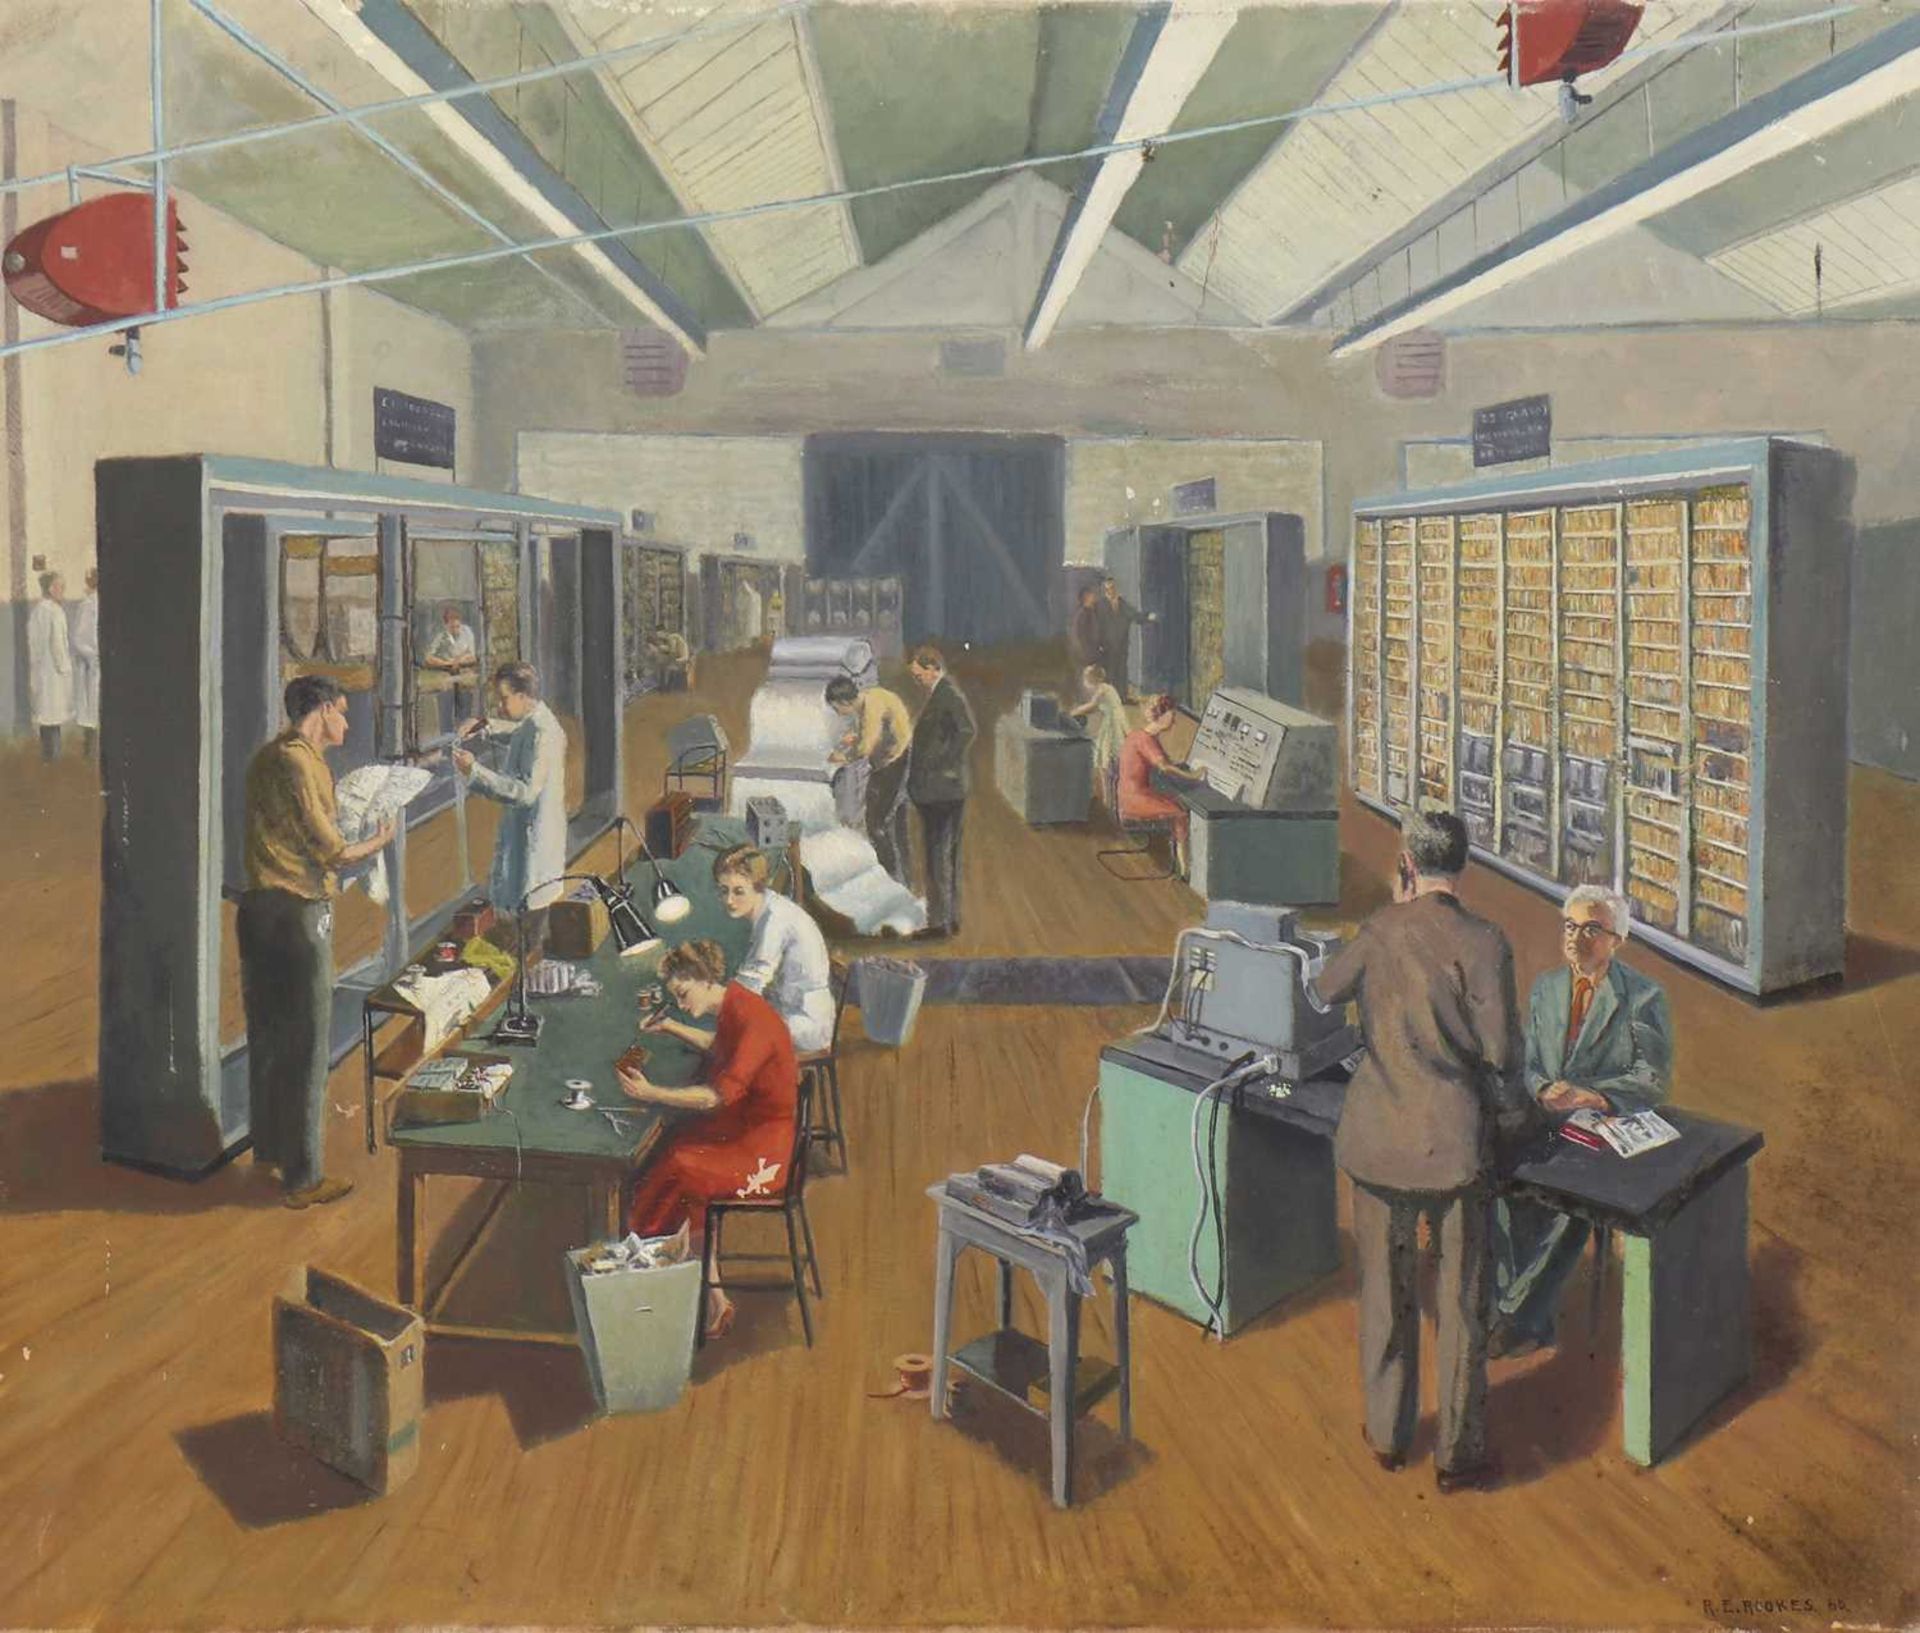 An early computer room